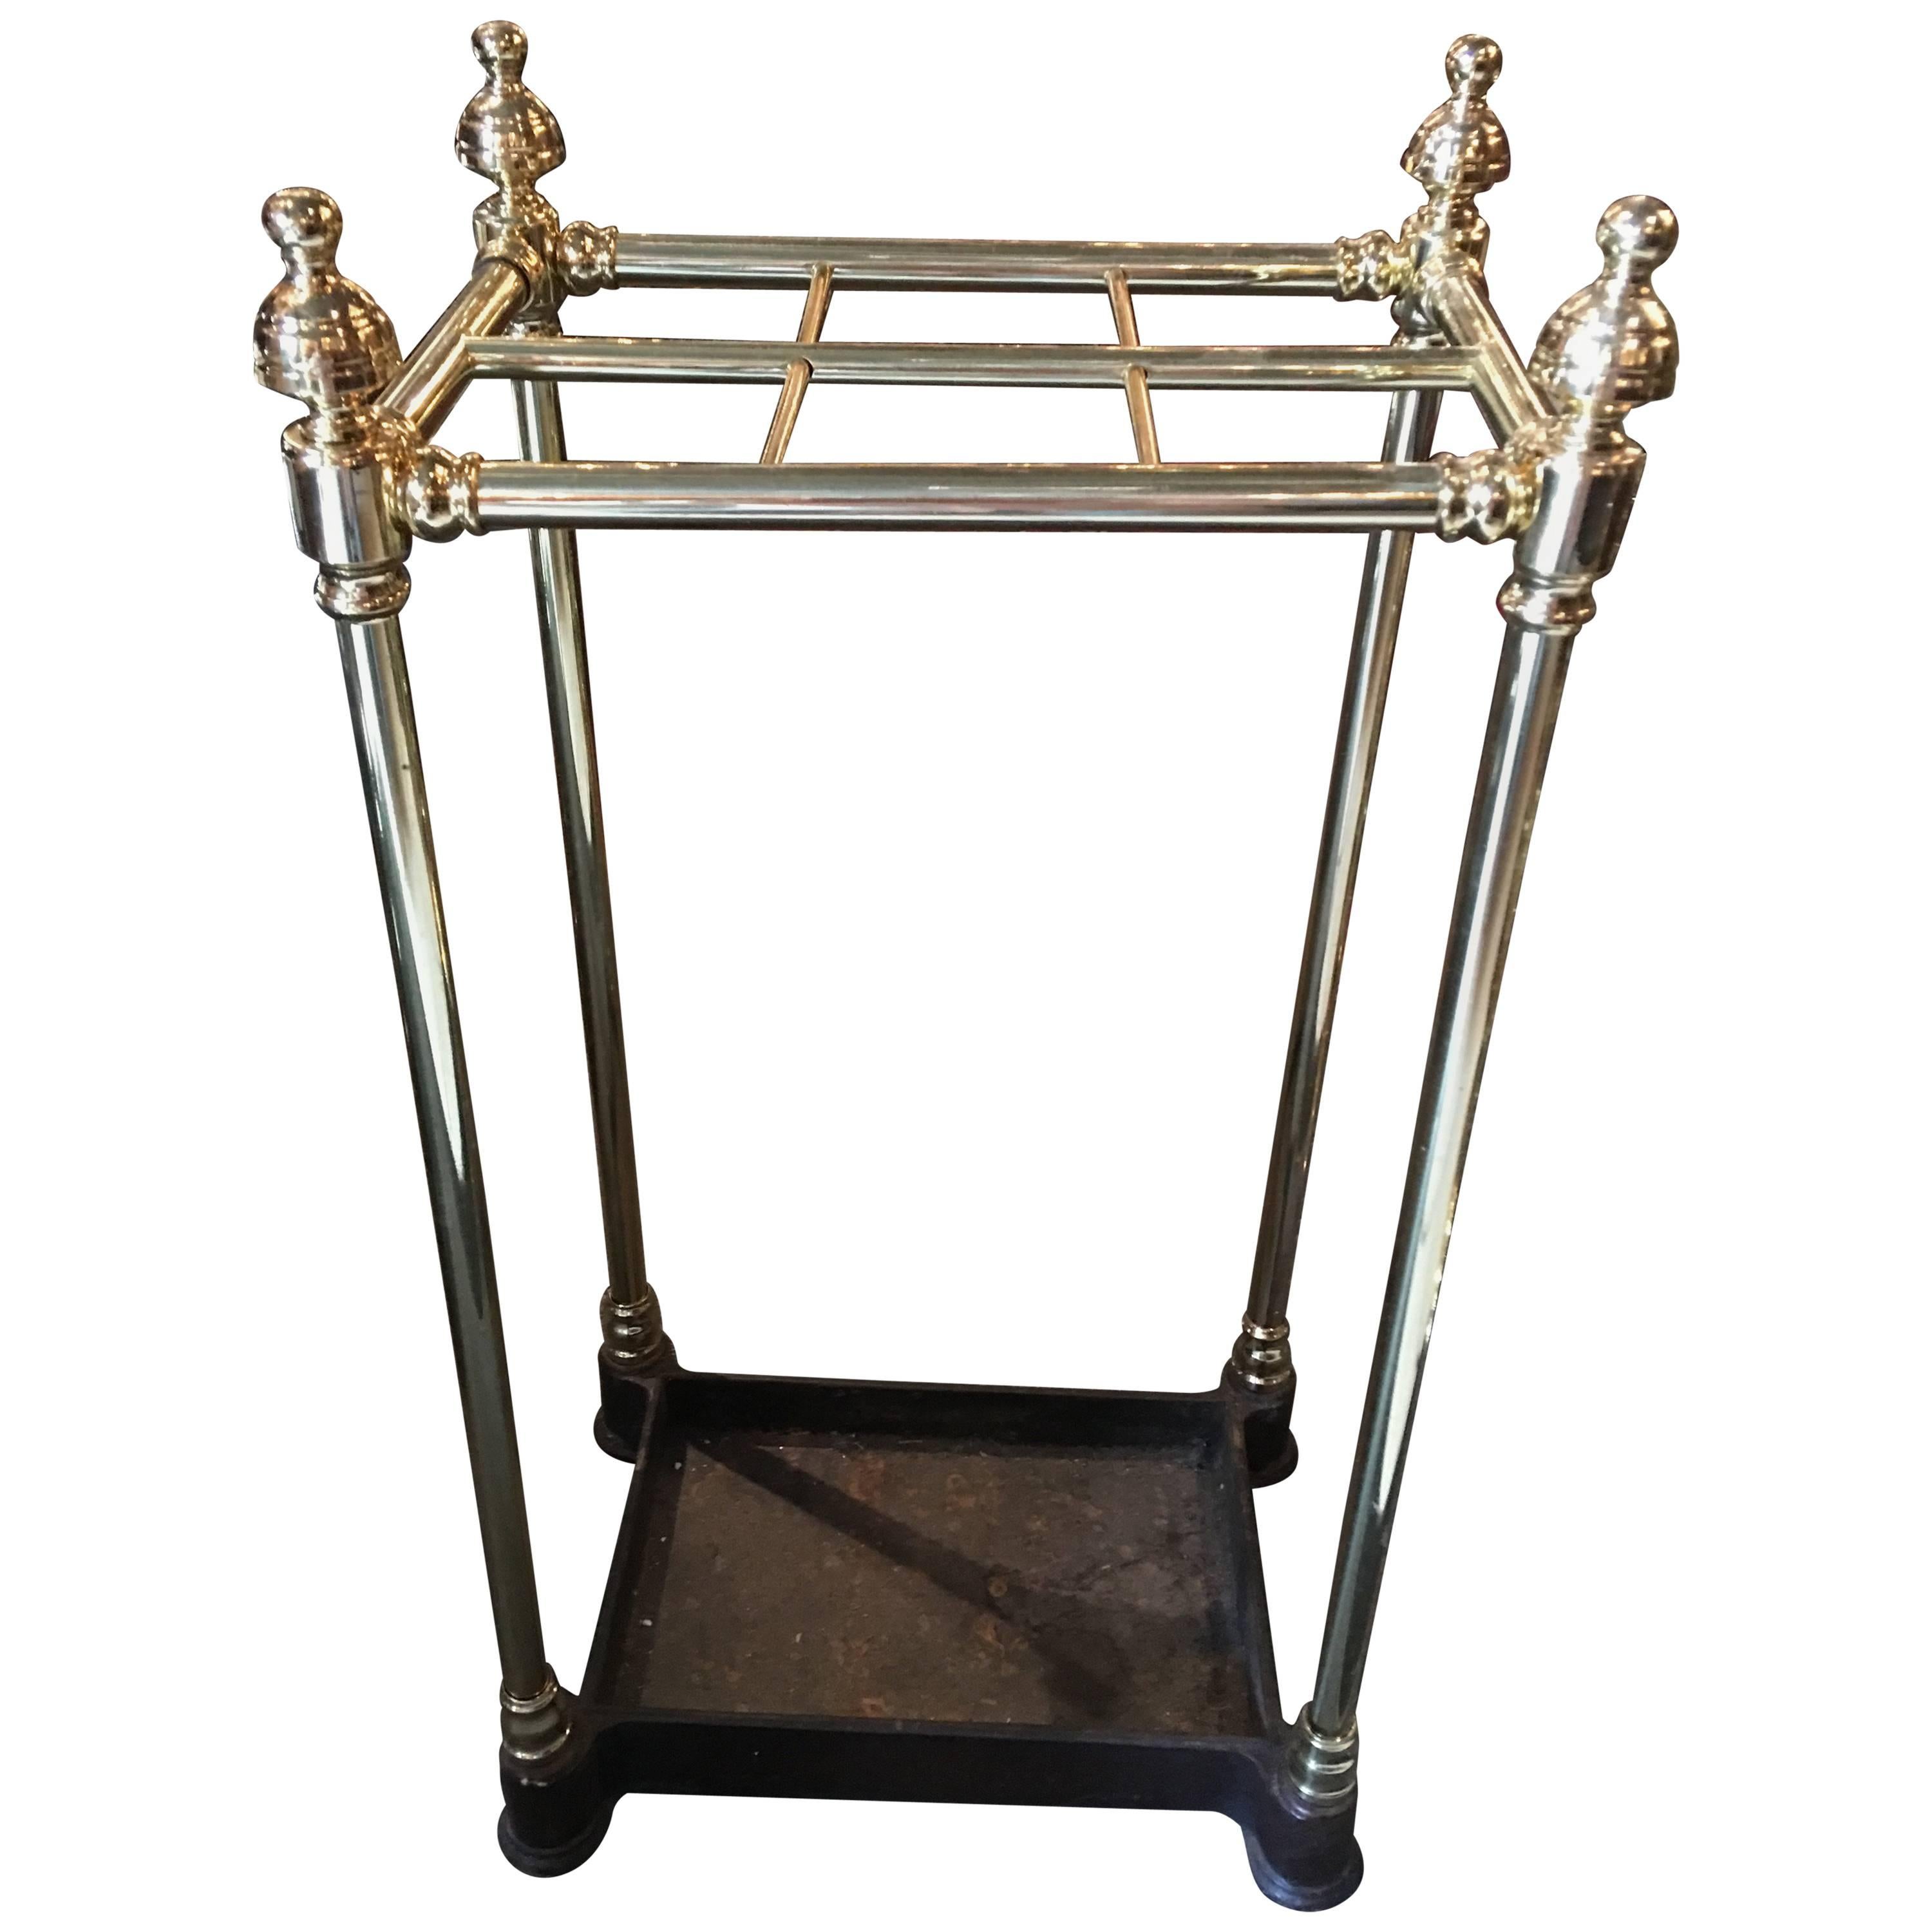 French Polished Brass and Iron Umbrella Stand, 19th Century